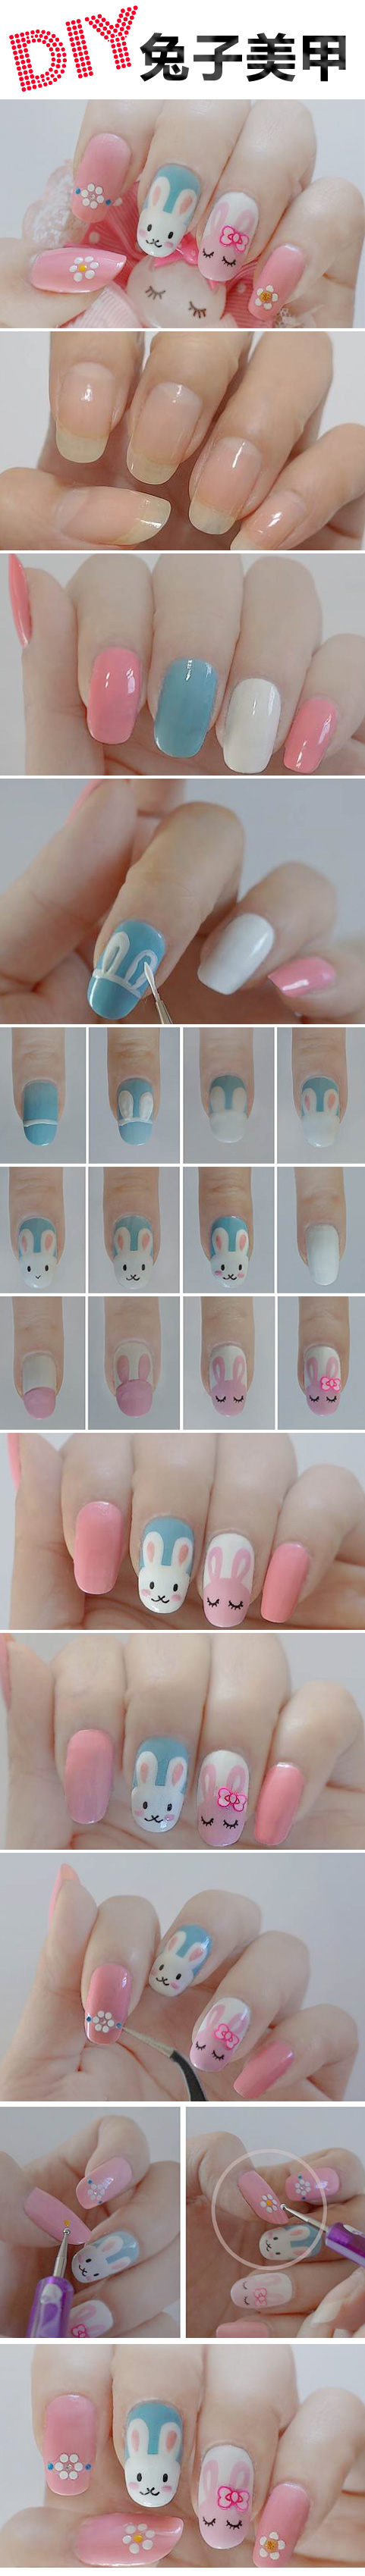 15 Amazing And Useful Nail Tutorials